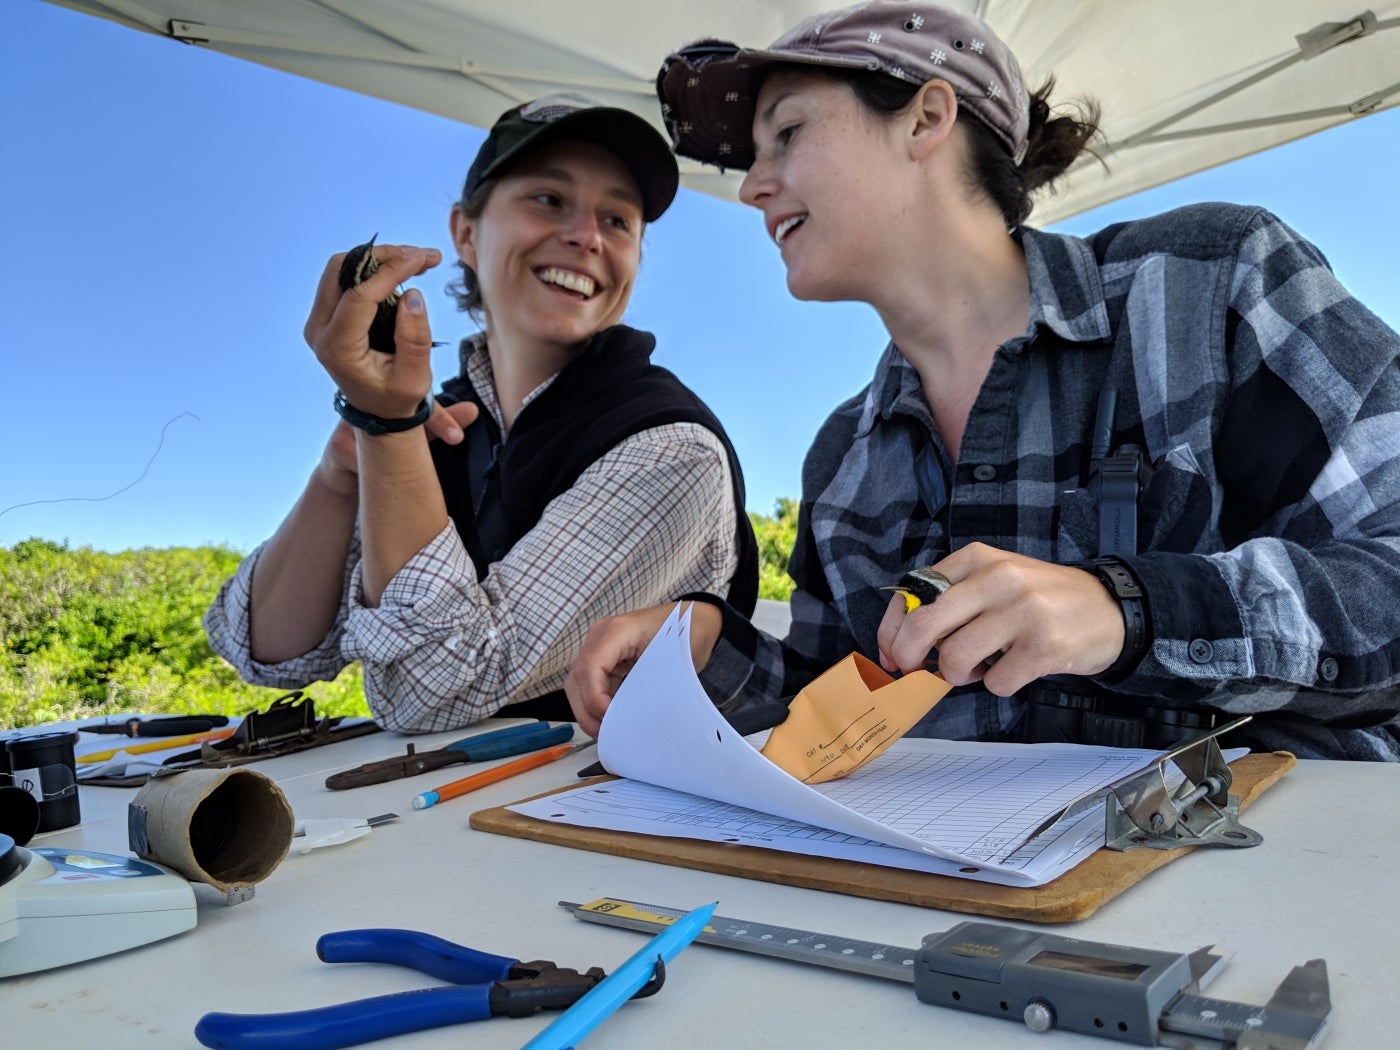 Two SMBC field researchers band two birds for tracking purposes at a field station site in Texas. The table in front of them has a clipboard, scale, ruler and other tools.